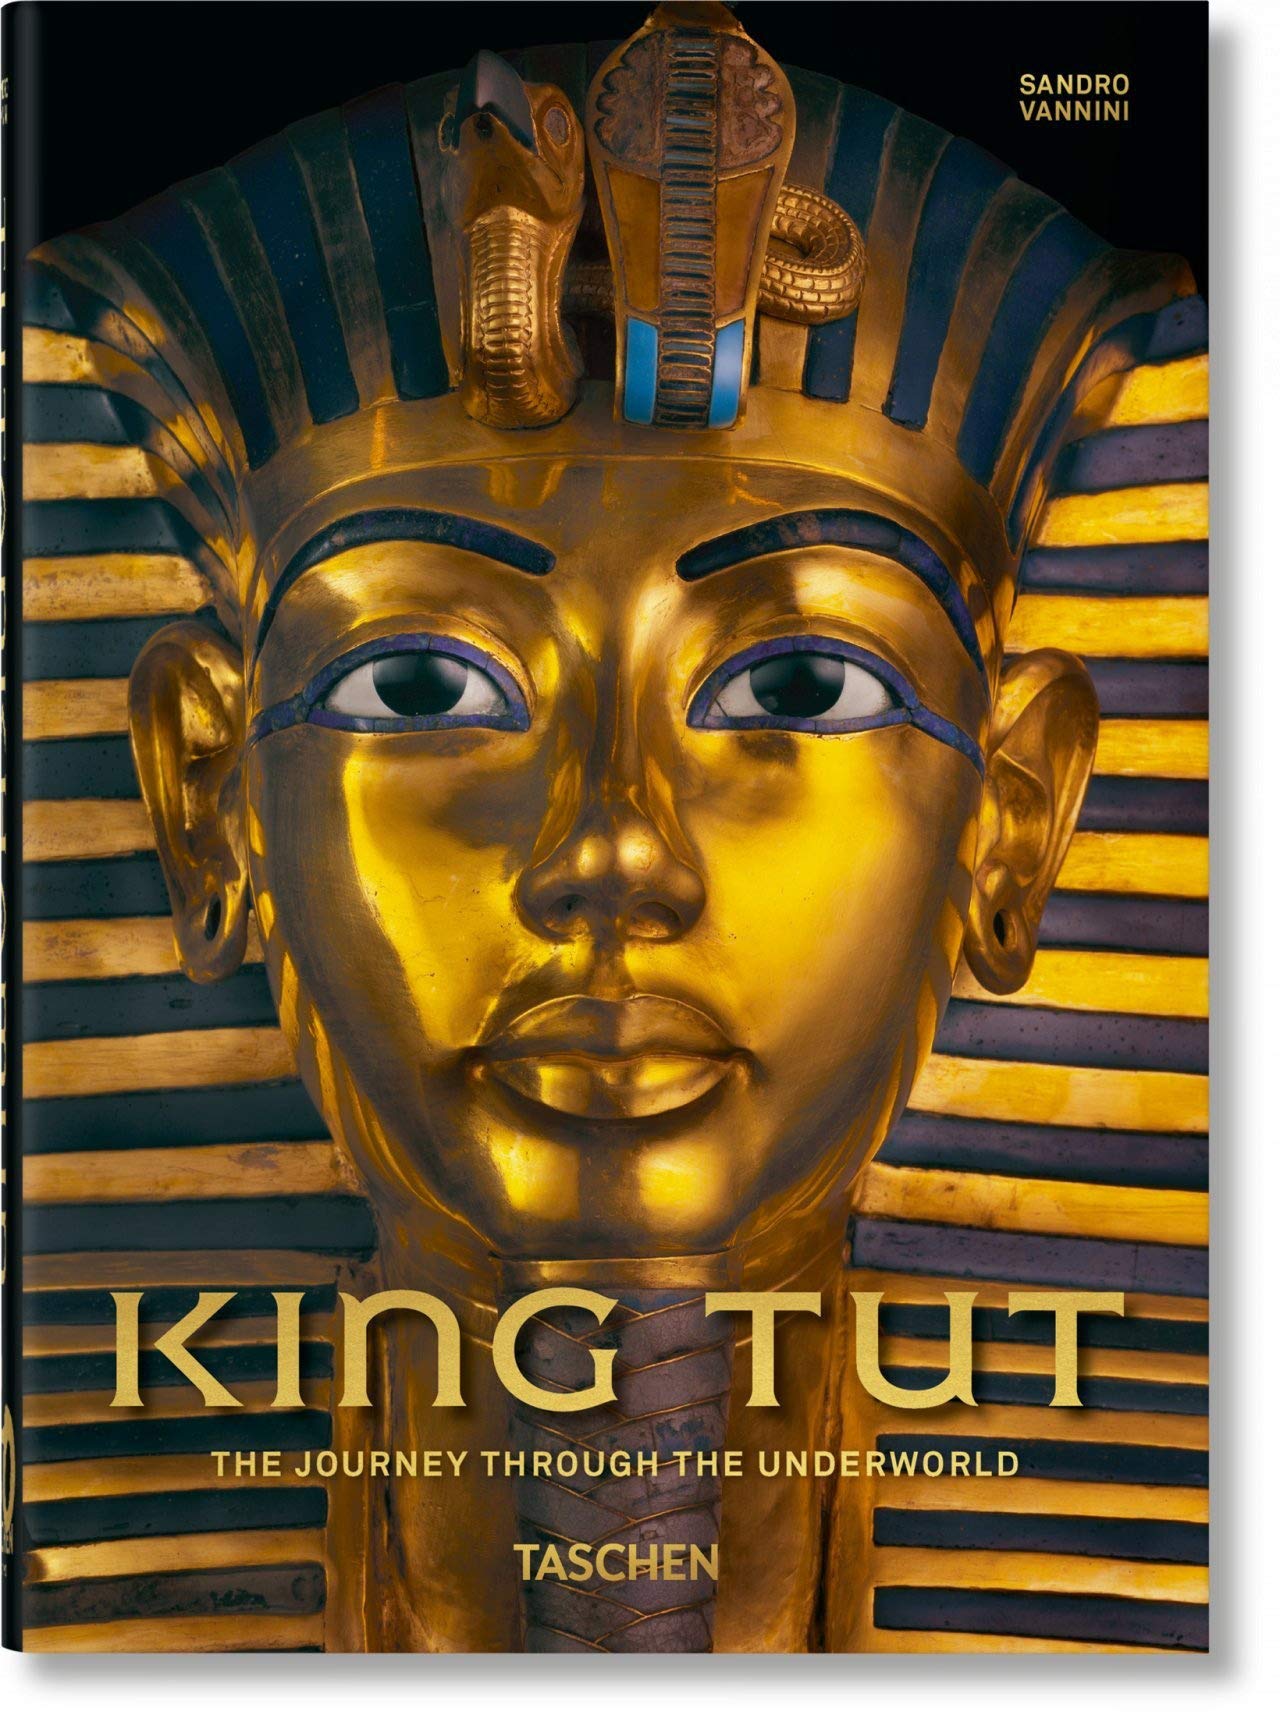 King Tut. The Journey through the Underworld (40th Anniversary Edition) zaha hadid complete works 1979 today